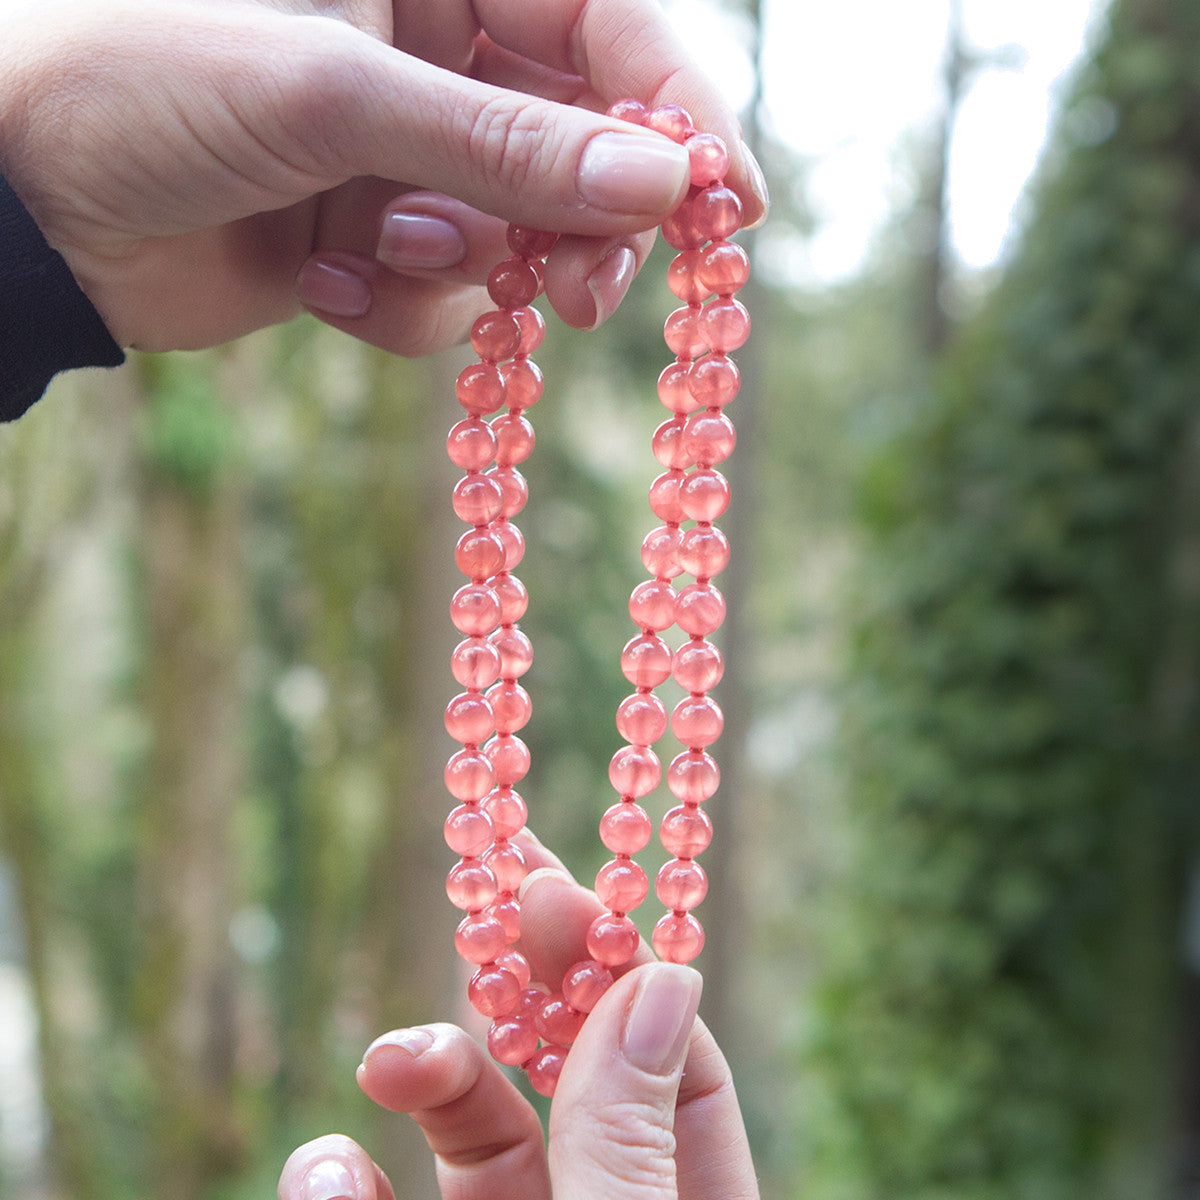 Crystal healing Rhodochrosite necklace known for helping you break free from unhealthy patterns and habits